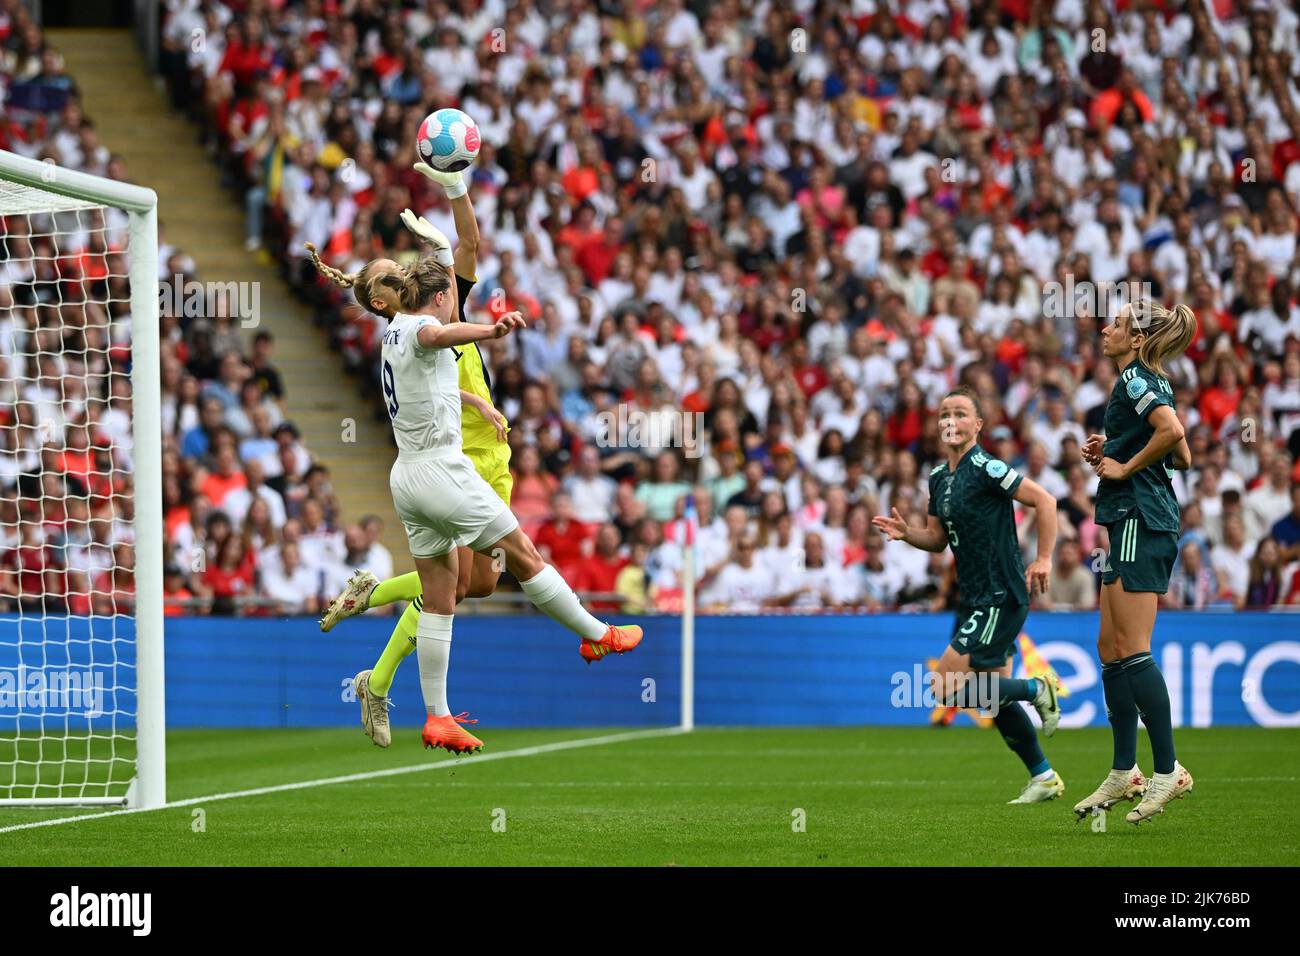 London, UK. JULY 31st. Merle Frohms of Germany makes a save during the UEFA Women's European Championship match between England and Germany at Wembley Stadium, London on Sunday 31st July 2022. (Credit: Pat Scaasi | MI News) Credit: MI News & Sport /Alamy Live News Stock Photo